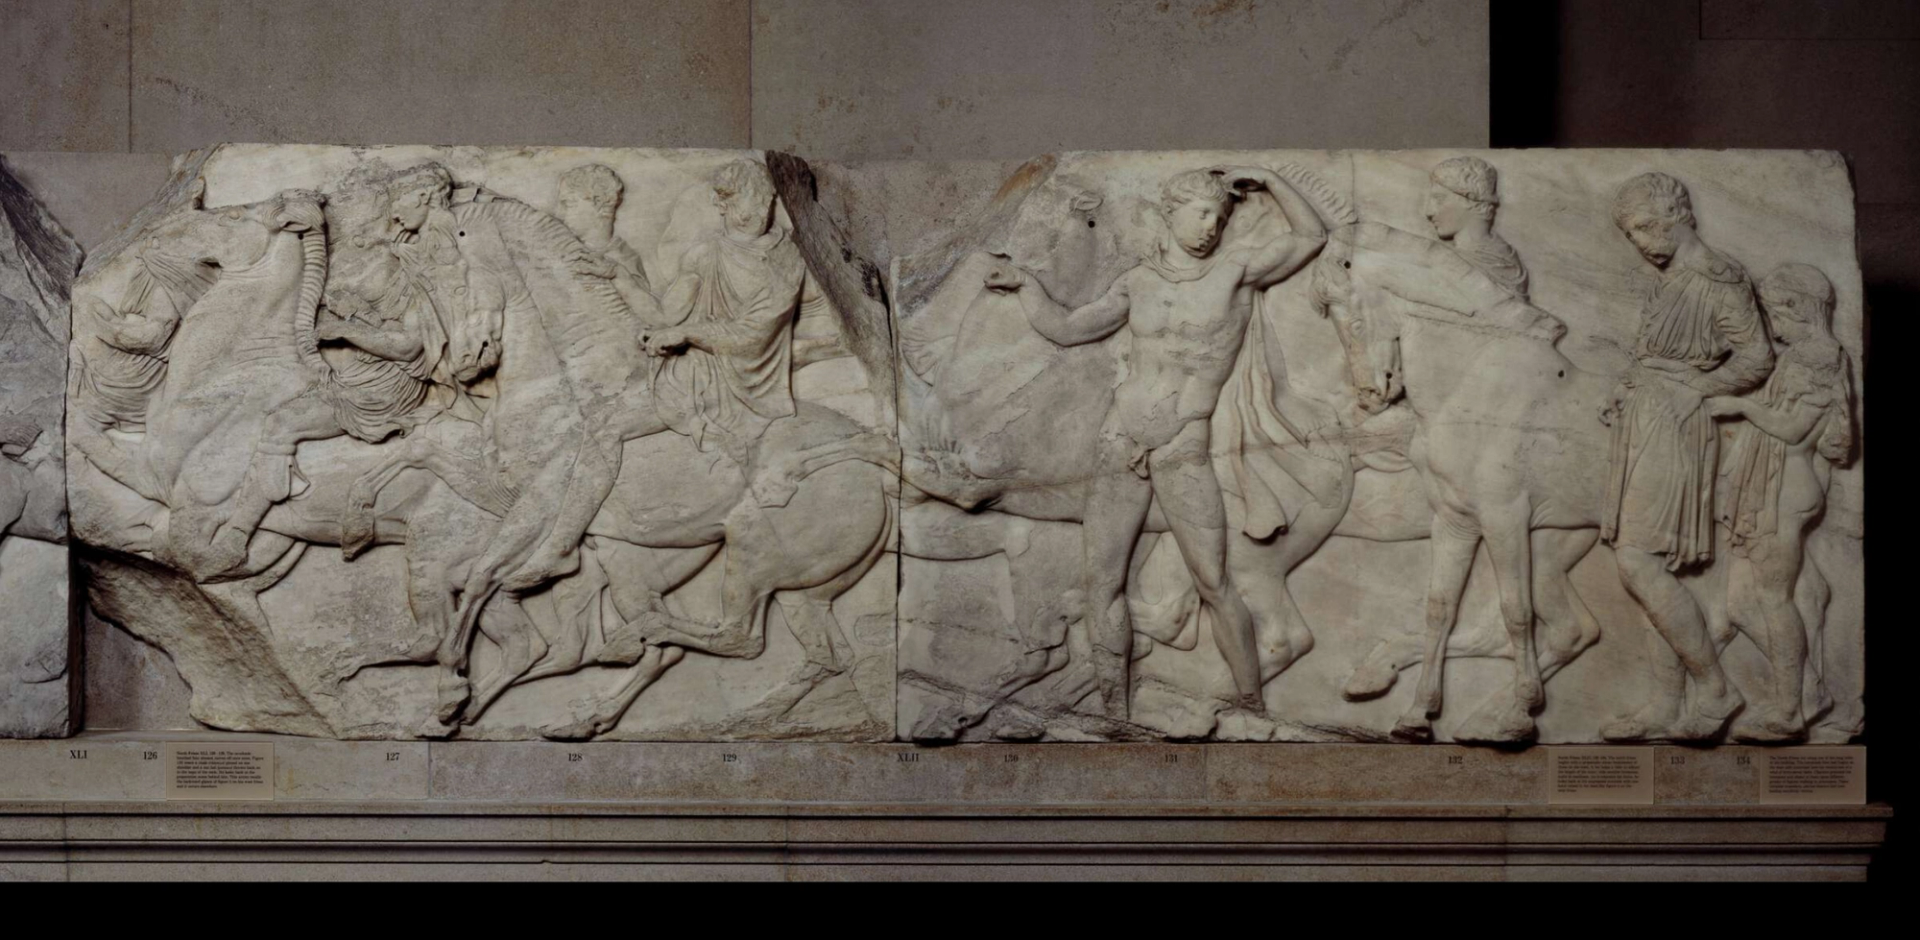 An image of a frieze from the Parthenon marbles. The frieze shows the procession of the Panathenaic festival, the commemoration of the birthday of the goddess Athena.